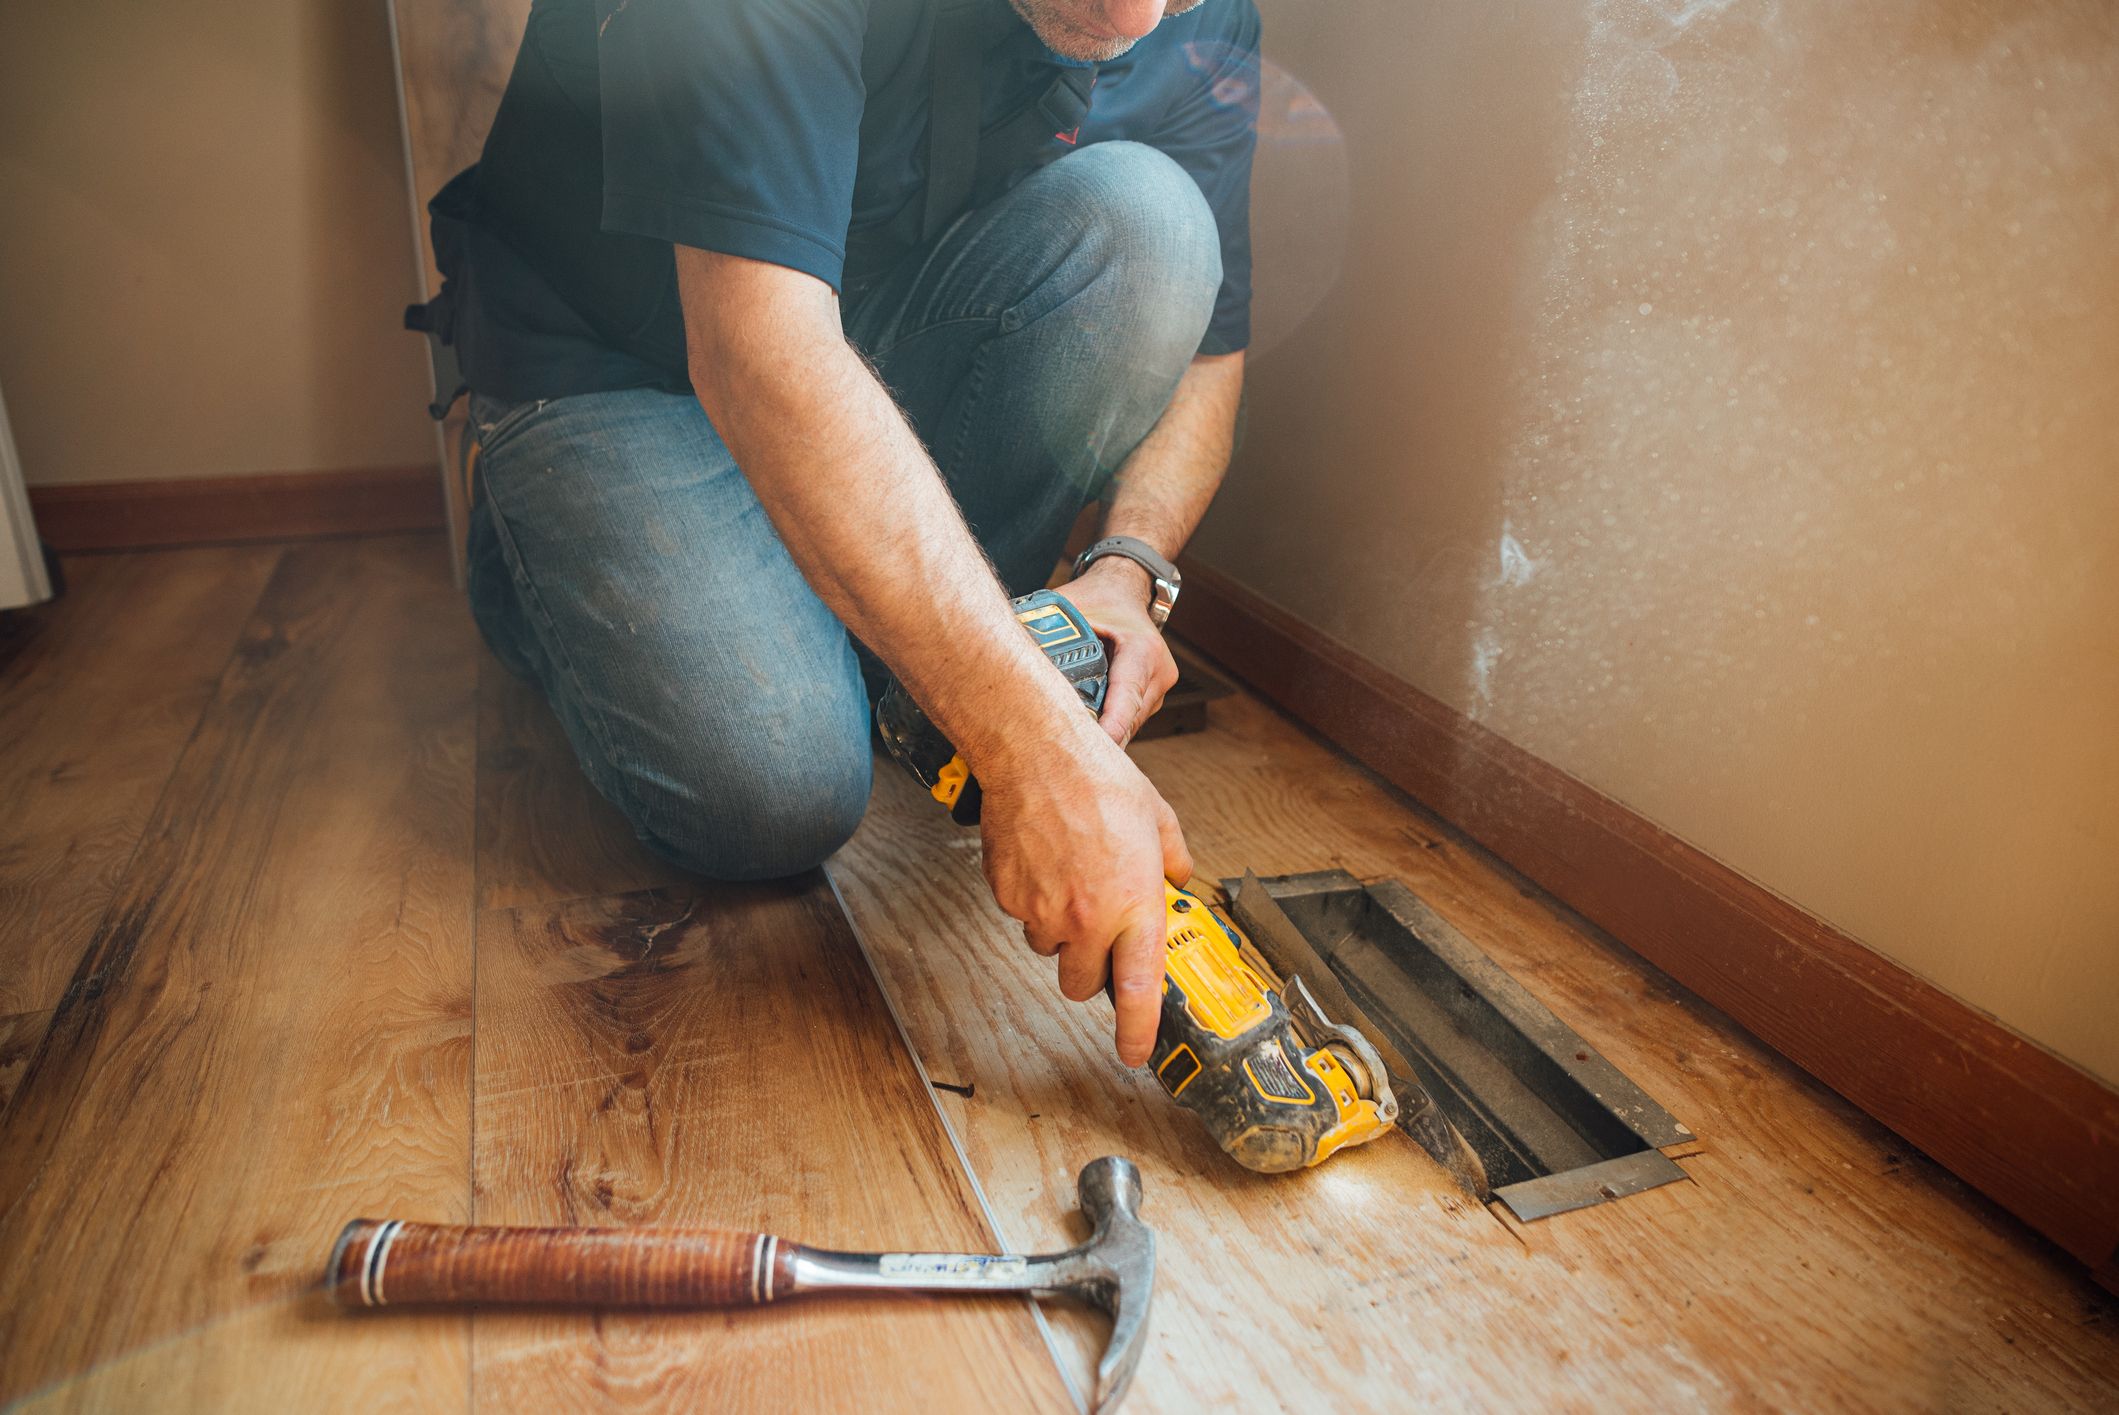 Oscillating Tools For Your Next Diy Project, Hardwood Floor Cutting Tools